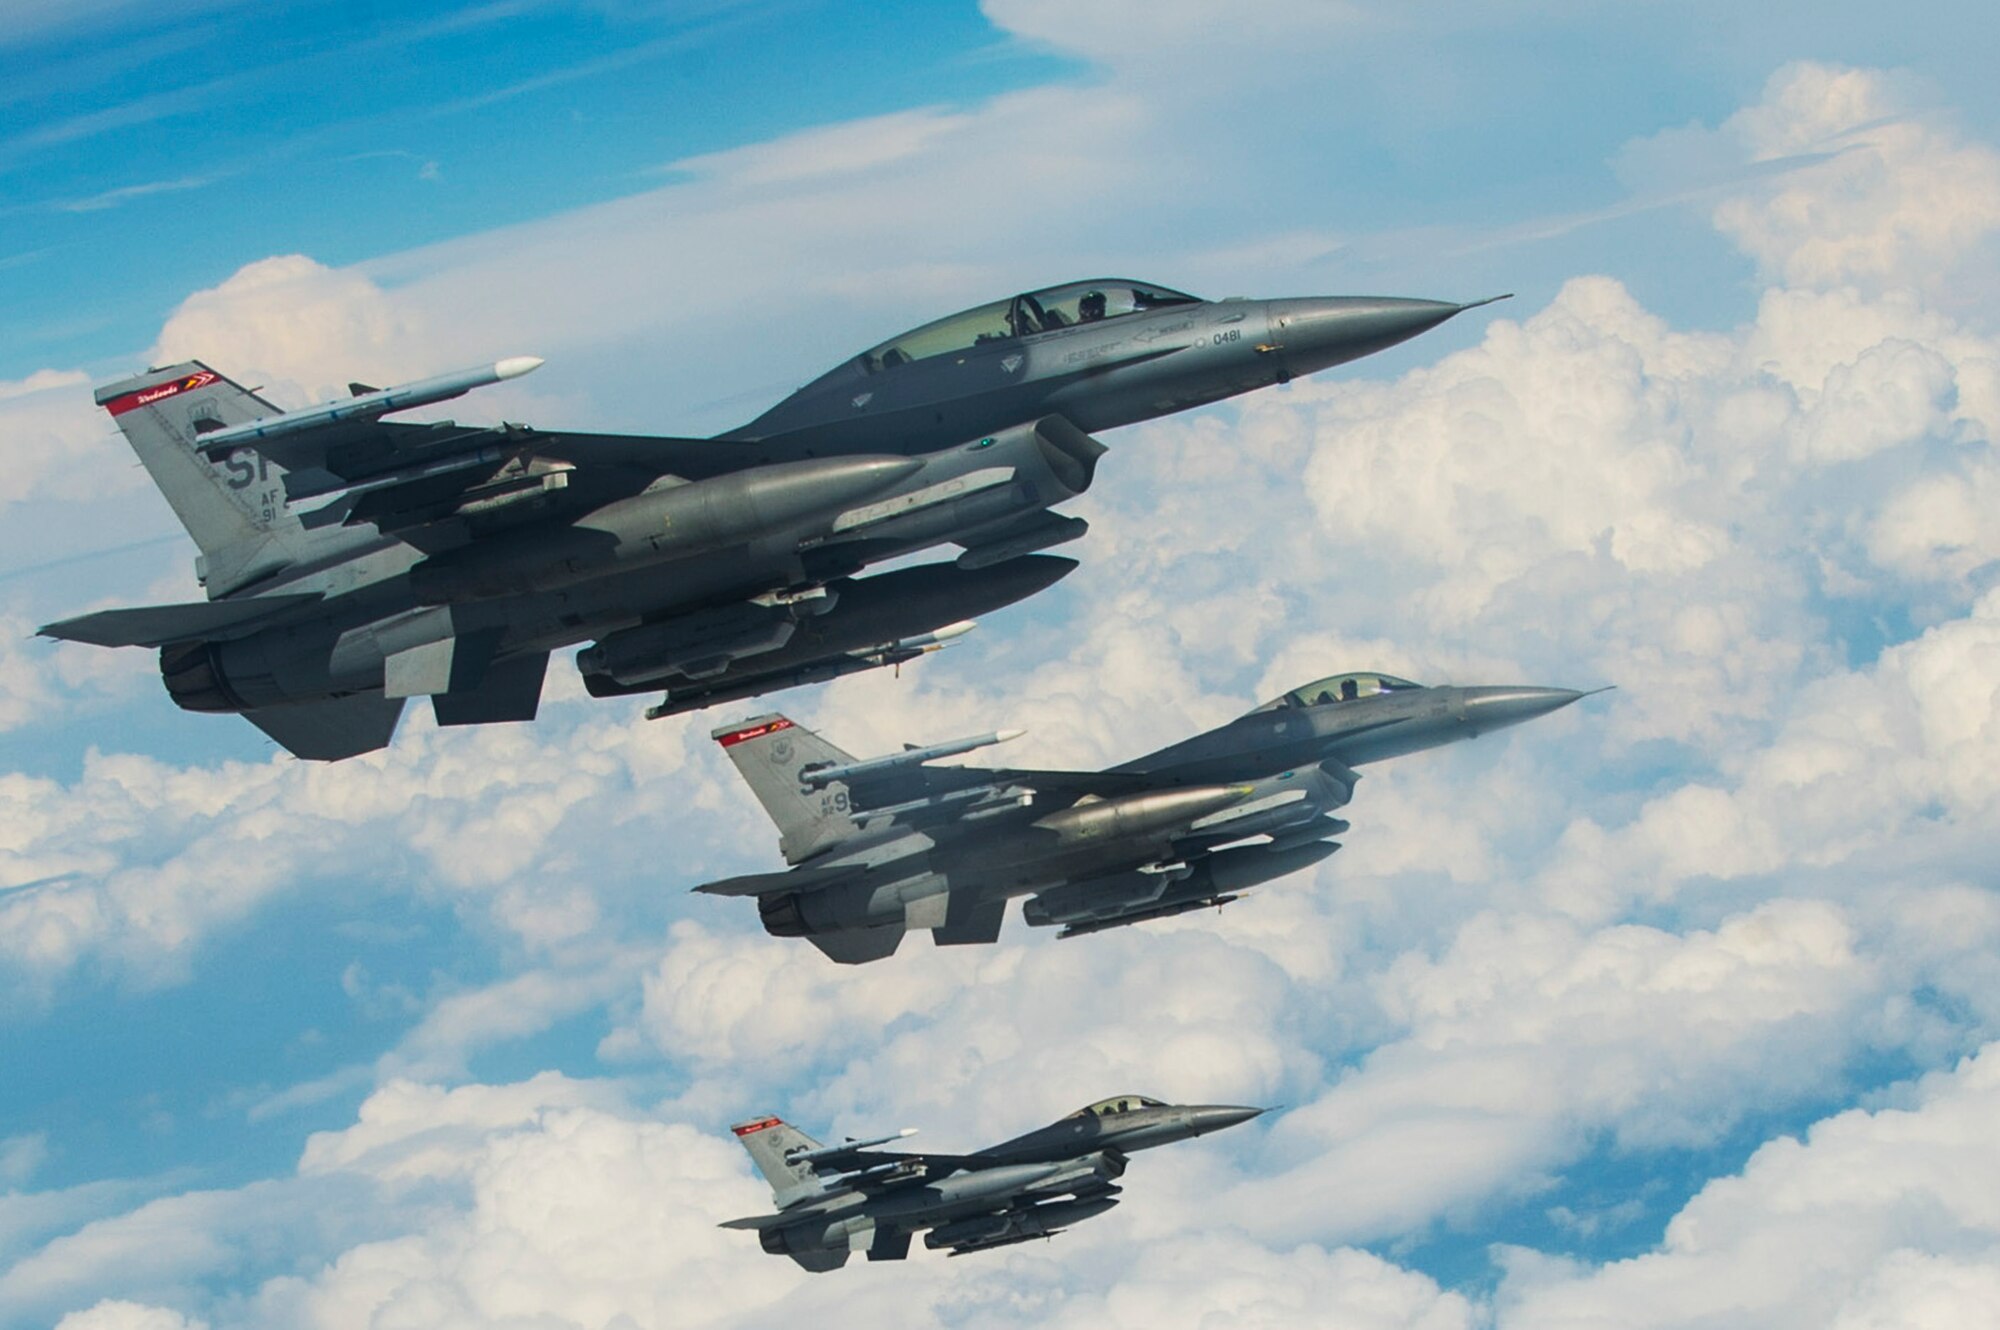 Three U.S. Air Force F-16 Fighting Falcons from the 480th Fighter Squadron fly beside an 185th Air Refueling Wing, Sioux City, Iowa KC-135 Stratotanker over Spangdahlem Air Base, Germany, May 30, 2017. For more than a week the Iowa Air National Guard has been conducting air-to-air refueling training with fighting falcons from the 52nd Fighter Wing. (U.S. Air Force photo by Senior Airman Dawn M. Weber)